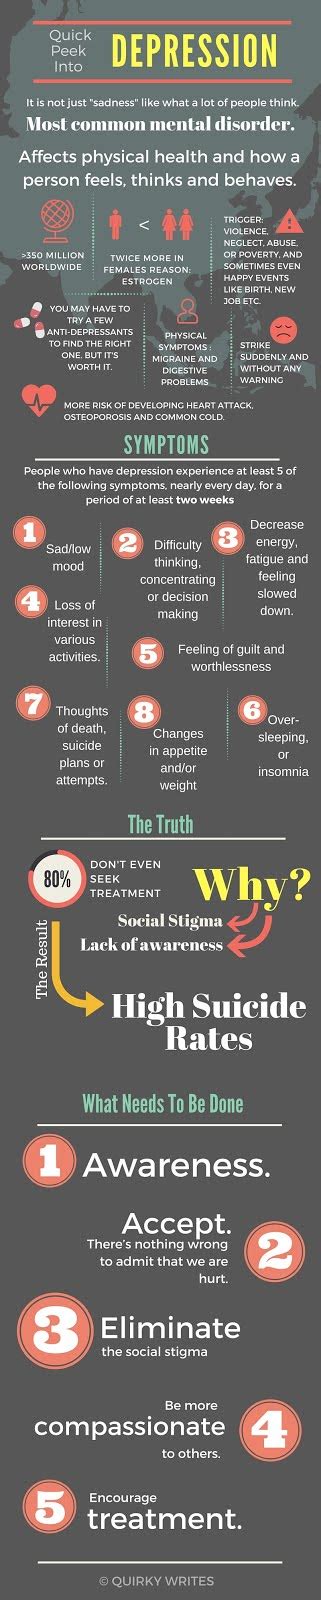 Depression The Infographic Quirky Writes